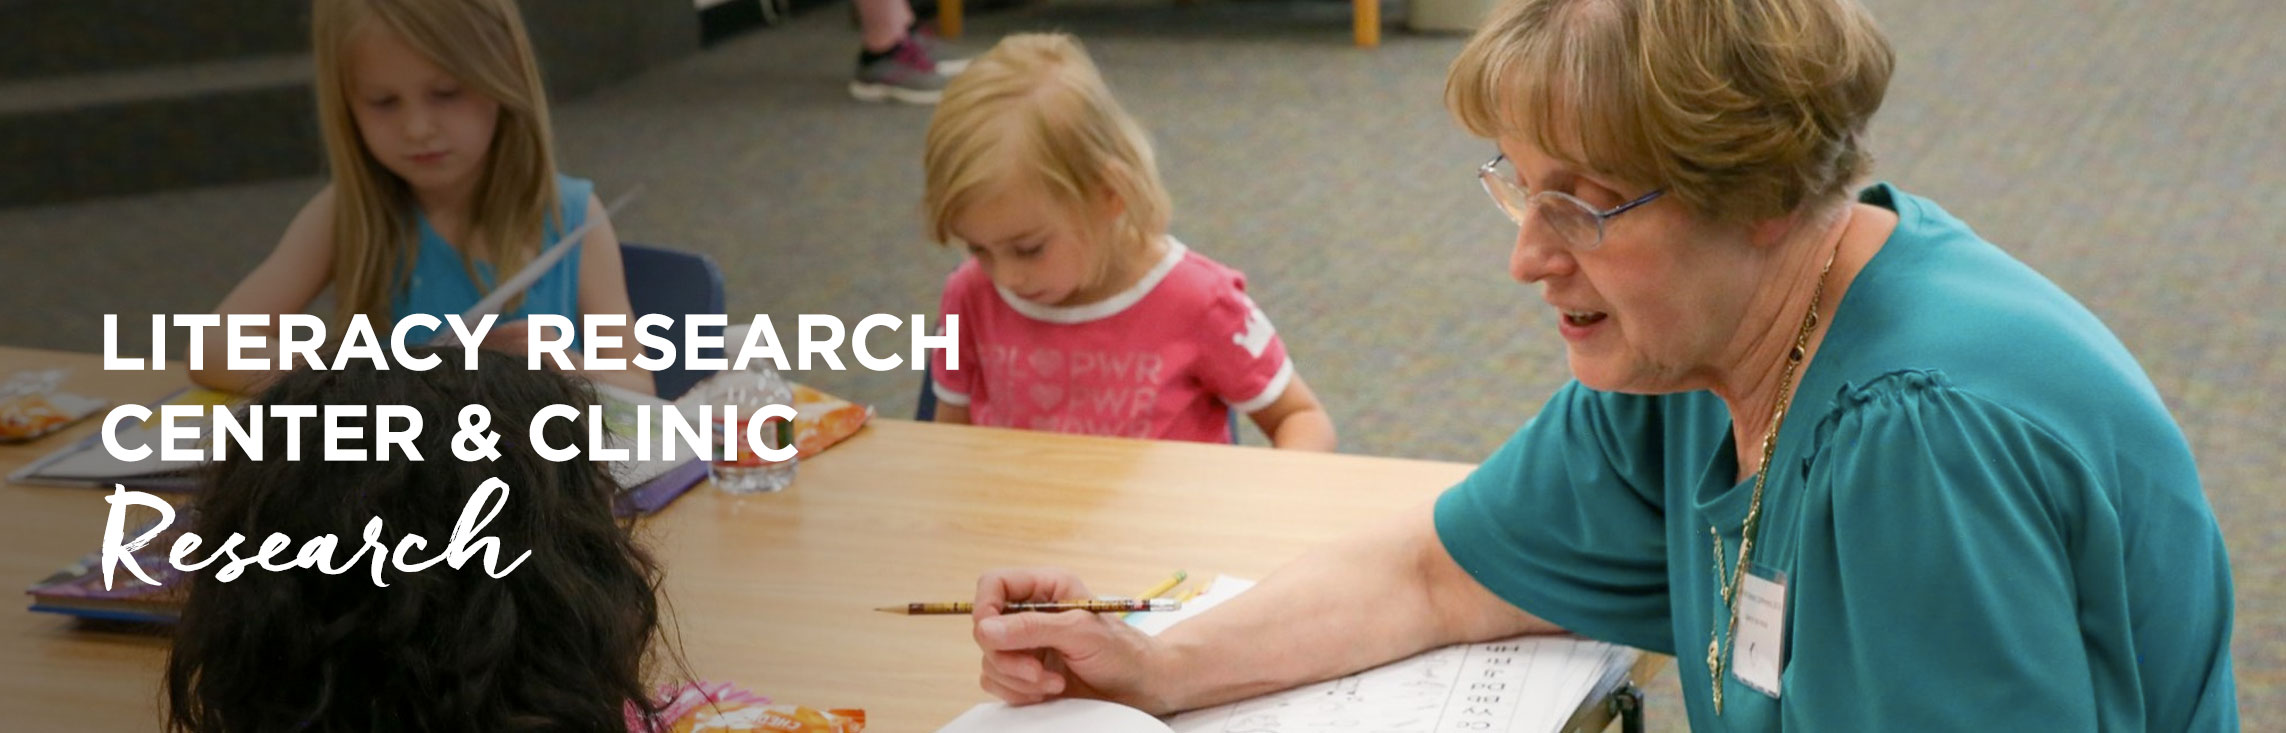 Teacher tutoring students with wording: Literacy Research Center & Clinic Research